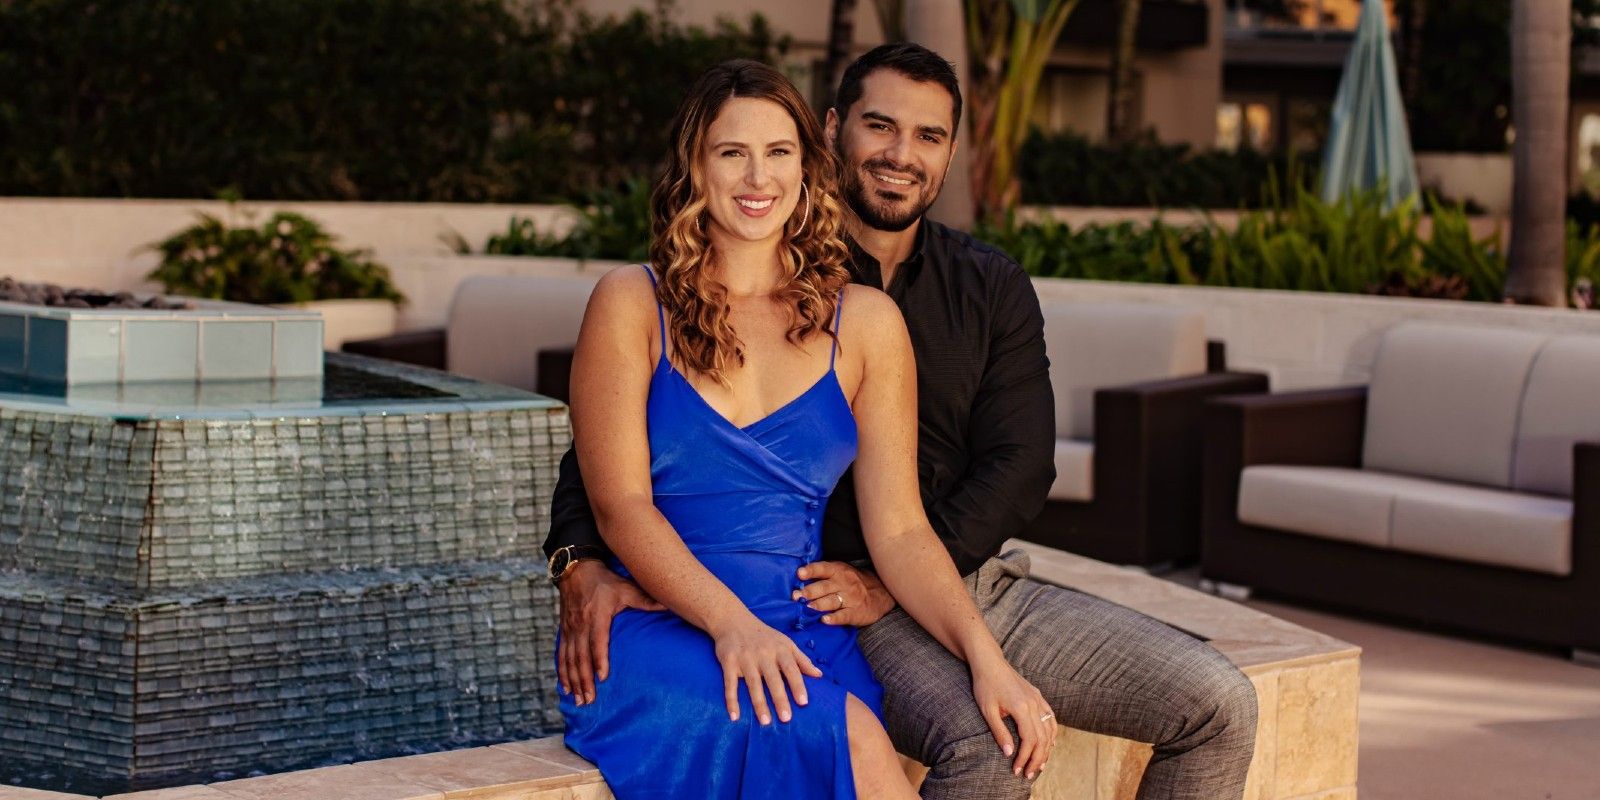 Miguel holding Lindy and Lindy in a blue dress from Married at First Sight season 15 smiling